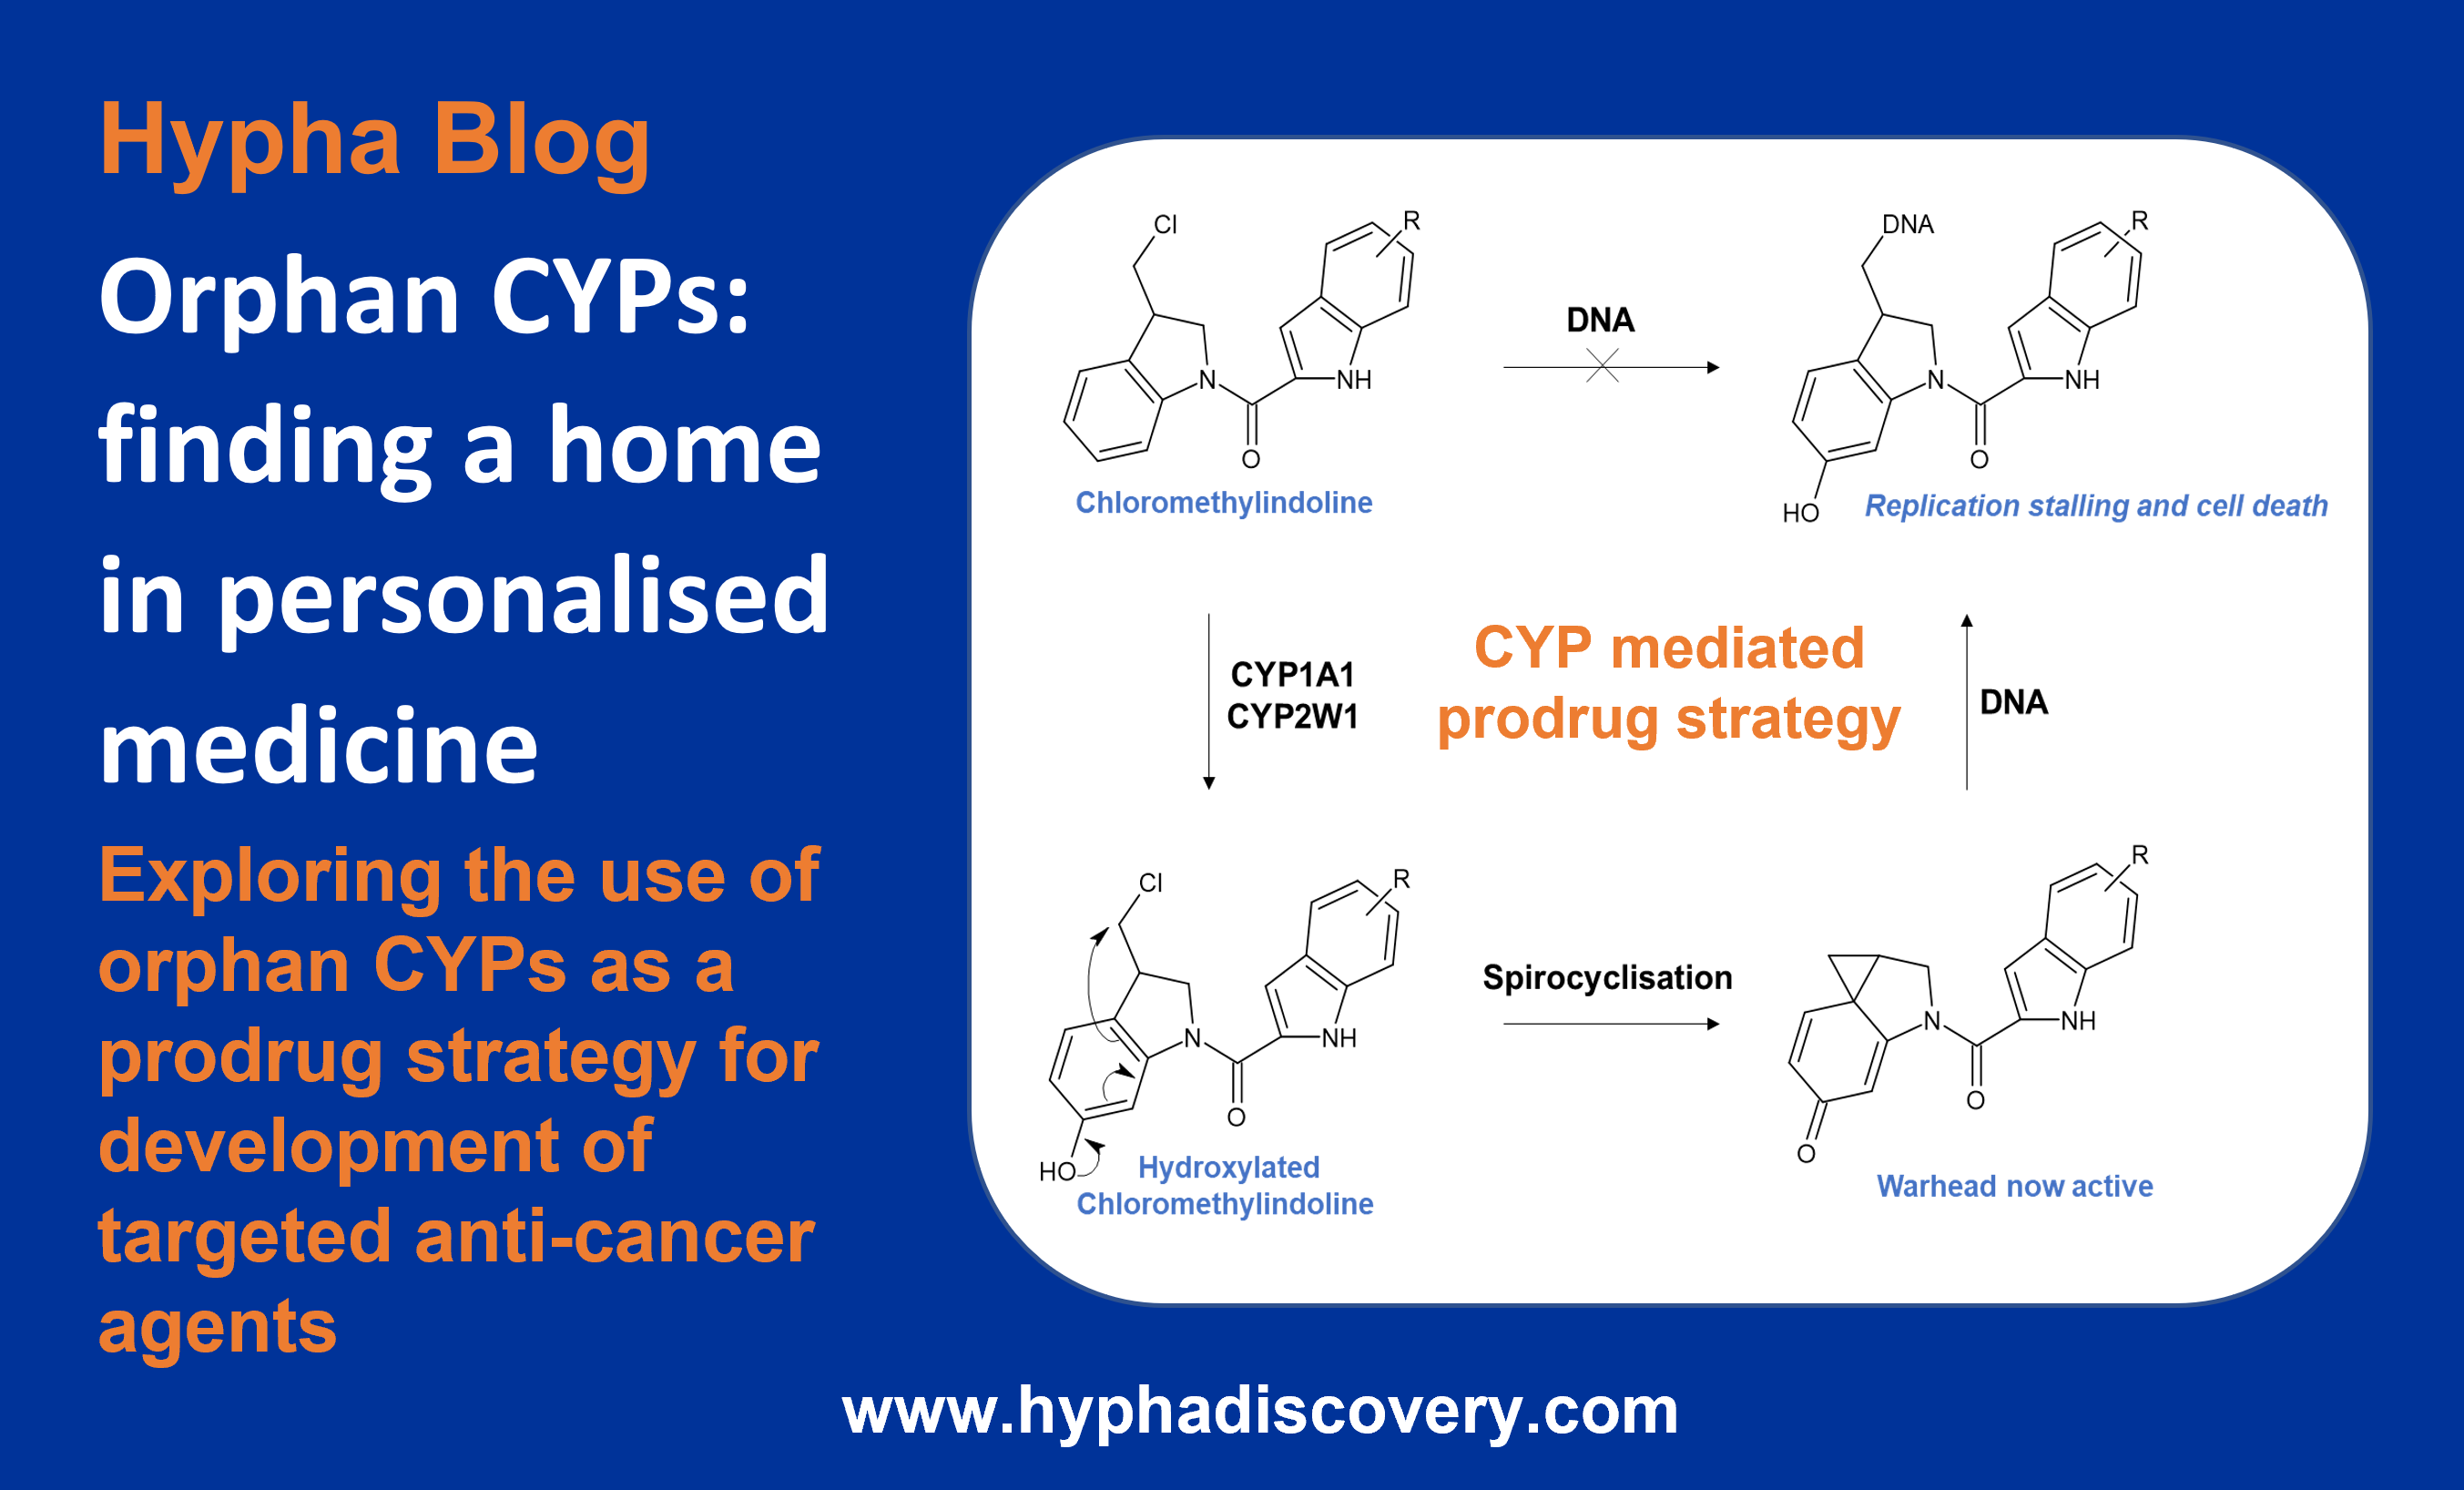 Summary image for Hypha Discovery orphan CYPs blog